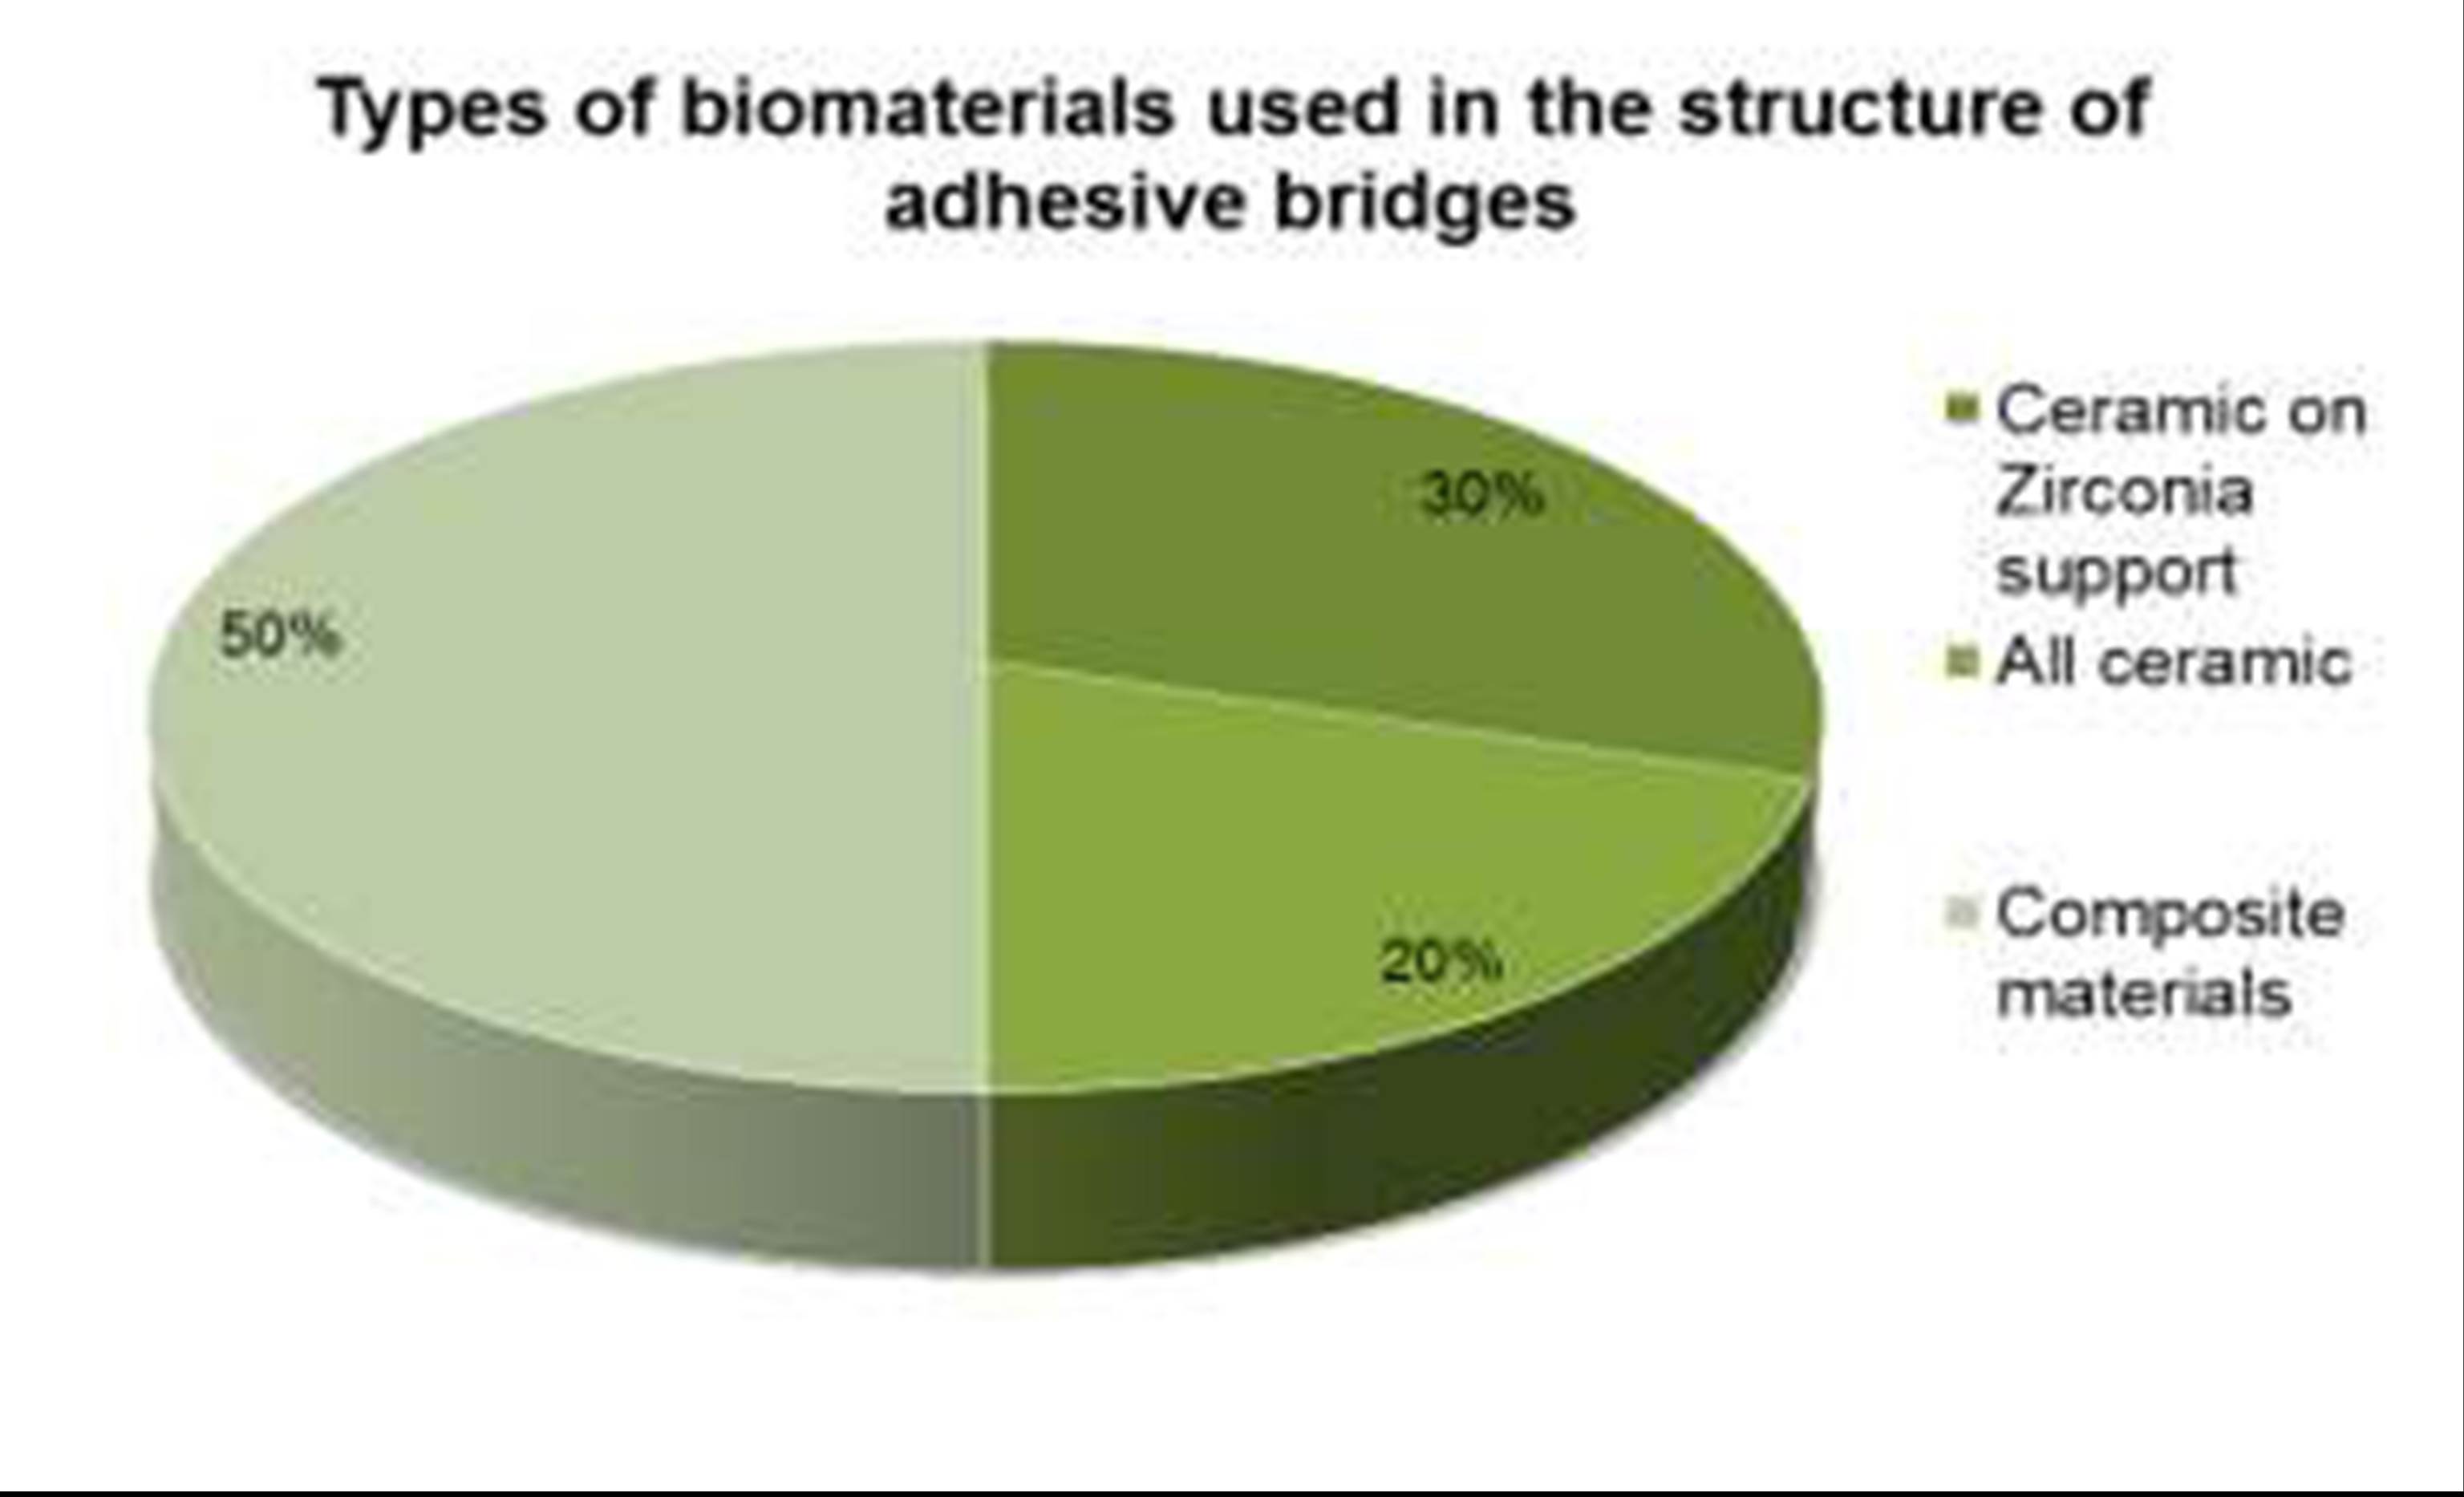 Types of biomaterials used in the structure of adhesive bridges 